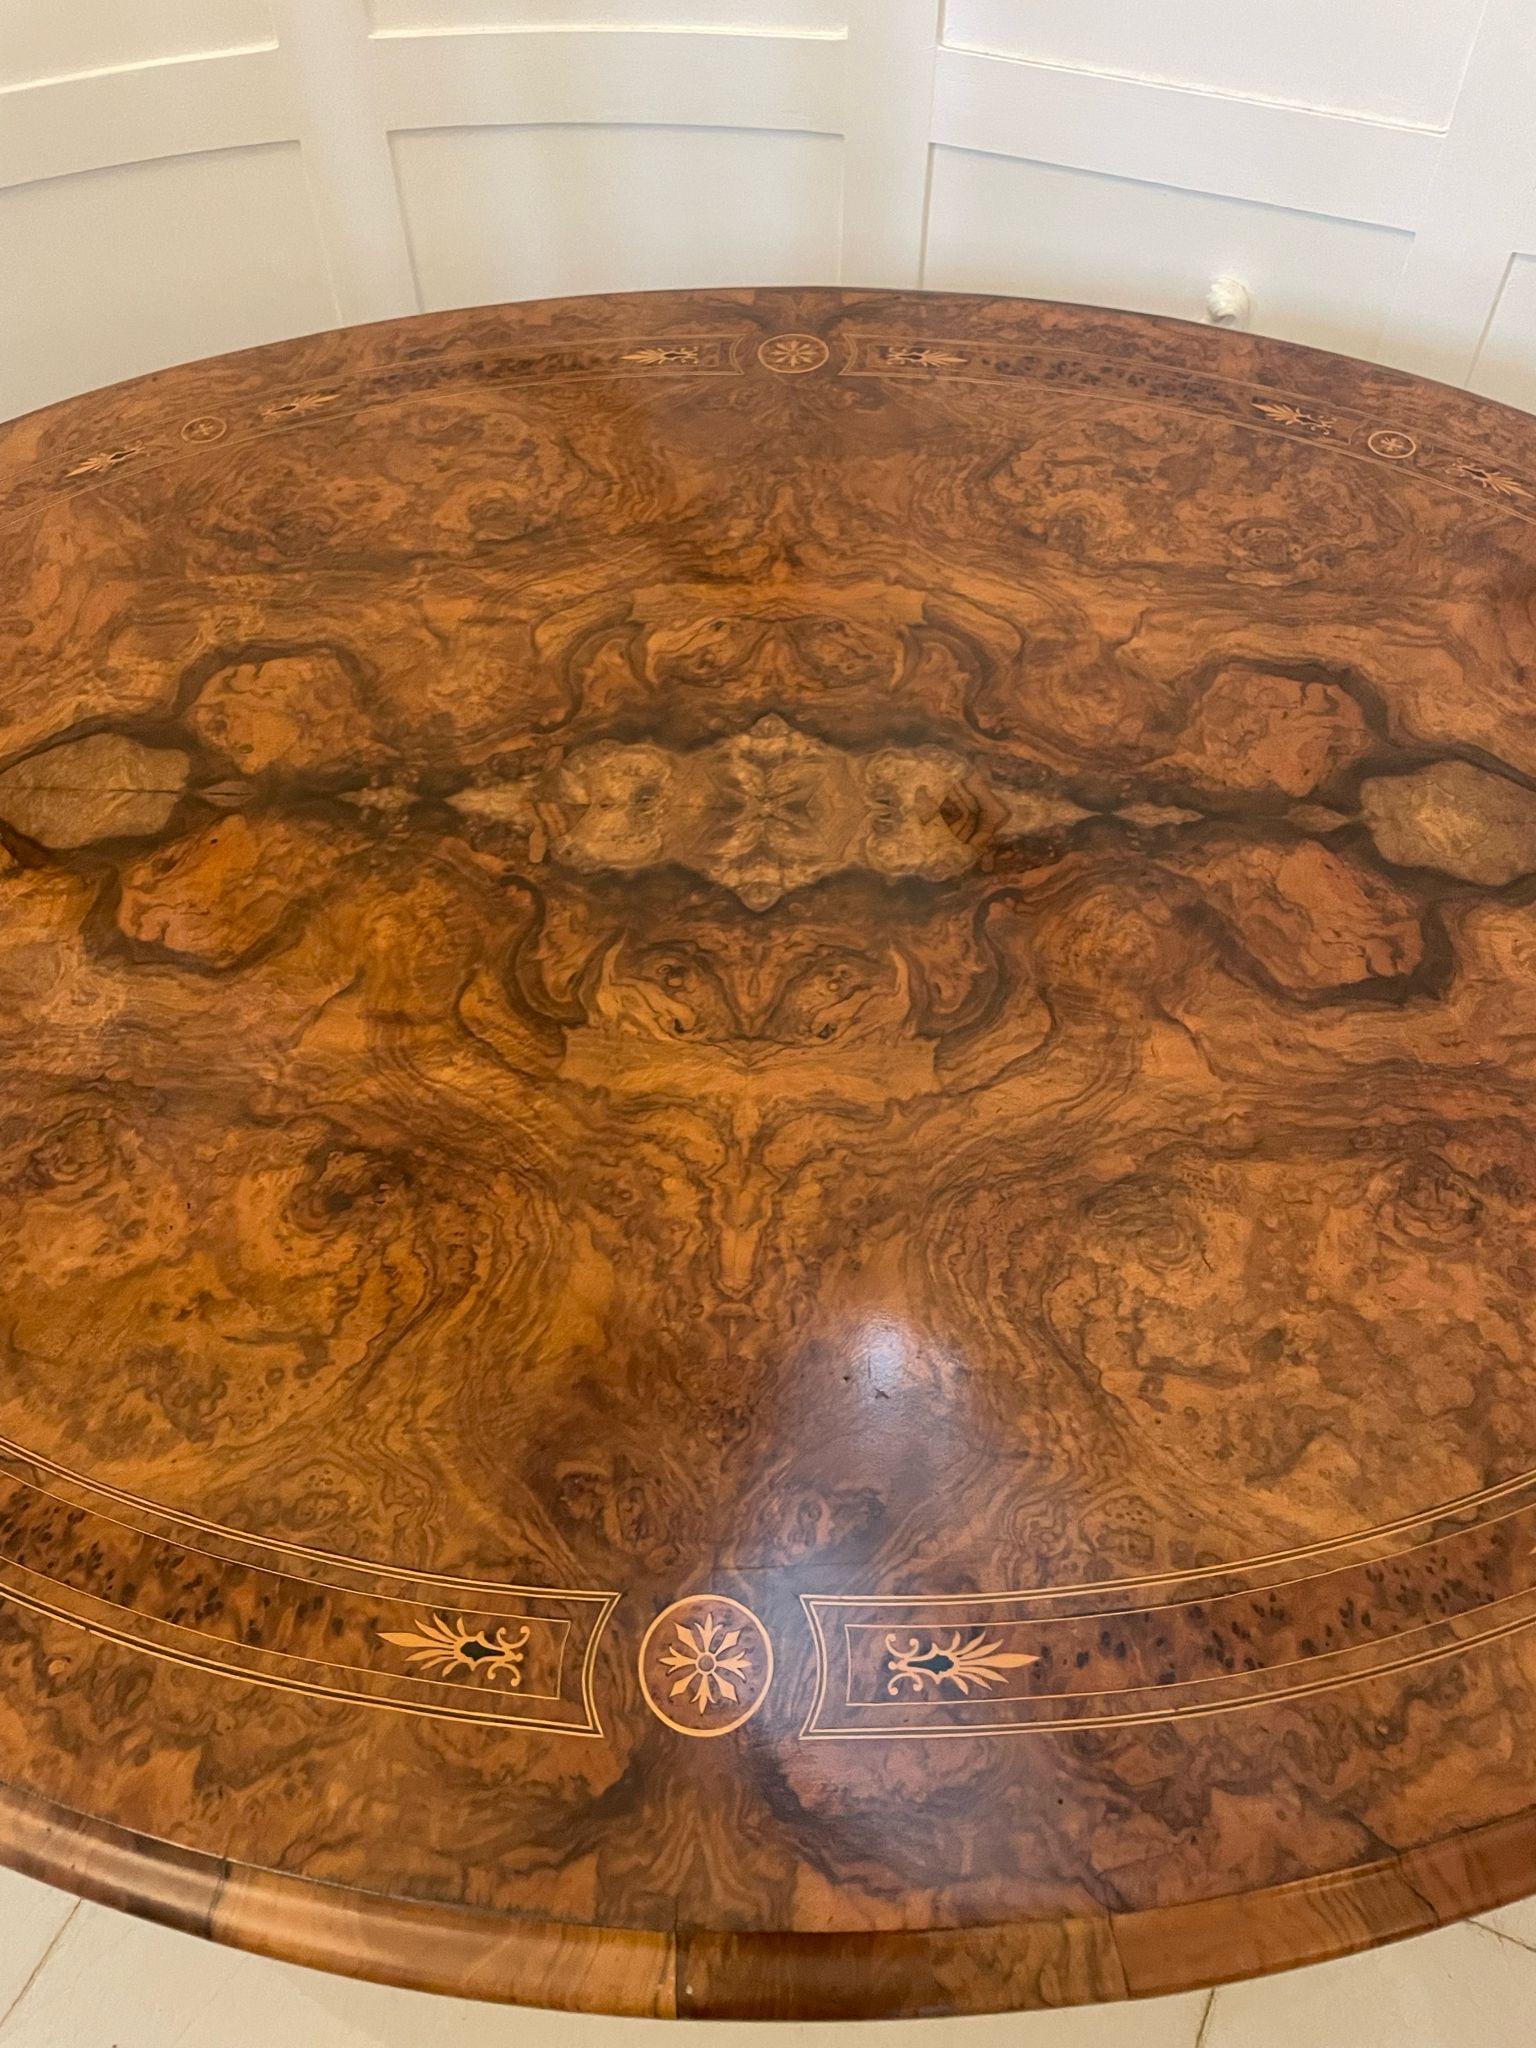 Outstanding Quality Antique Victorian Burr Walnut Inlaid Oval Coffee Table  2